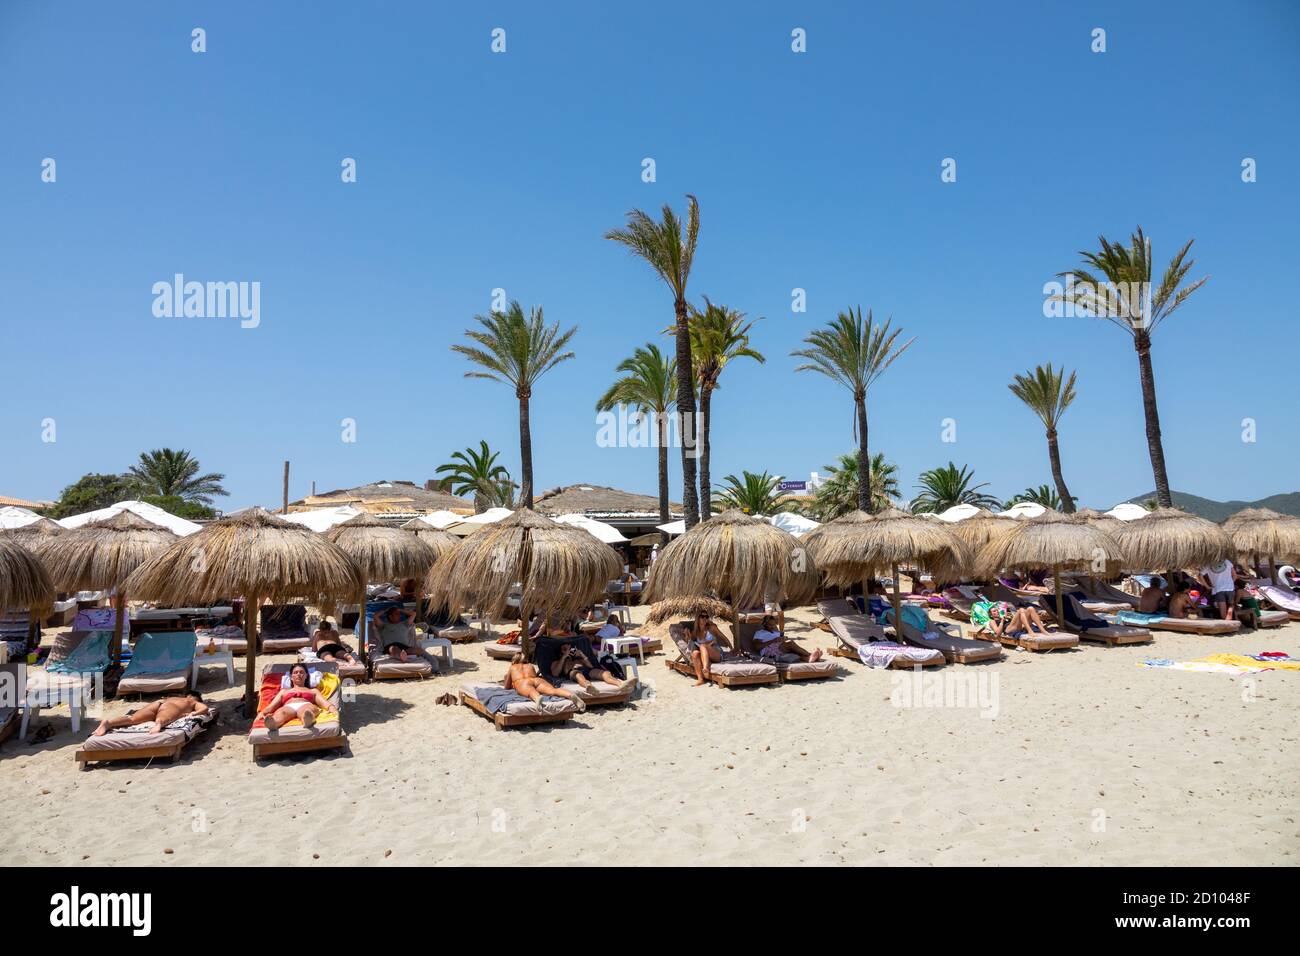 Picture dated July 29th shows the quiet  Platja d'en Bossa (Playa d'en Bossa) beach on Wednesday afternoon  as the restrictions on visiting the Spanish Balearic Islands starts to take effect with very few new visitors arriving.  Earlier this week the Foreign Office extended its travel advice for Spain, now telling people to avoid non-essential journeys to the Canary and Balearic Islands, as well as mainland Spain.  But some travel agents say they are struggling to understand the logic of the UK government's advice, because the islands have lower coronavirus infection rates. Stock Photo